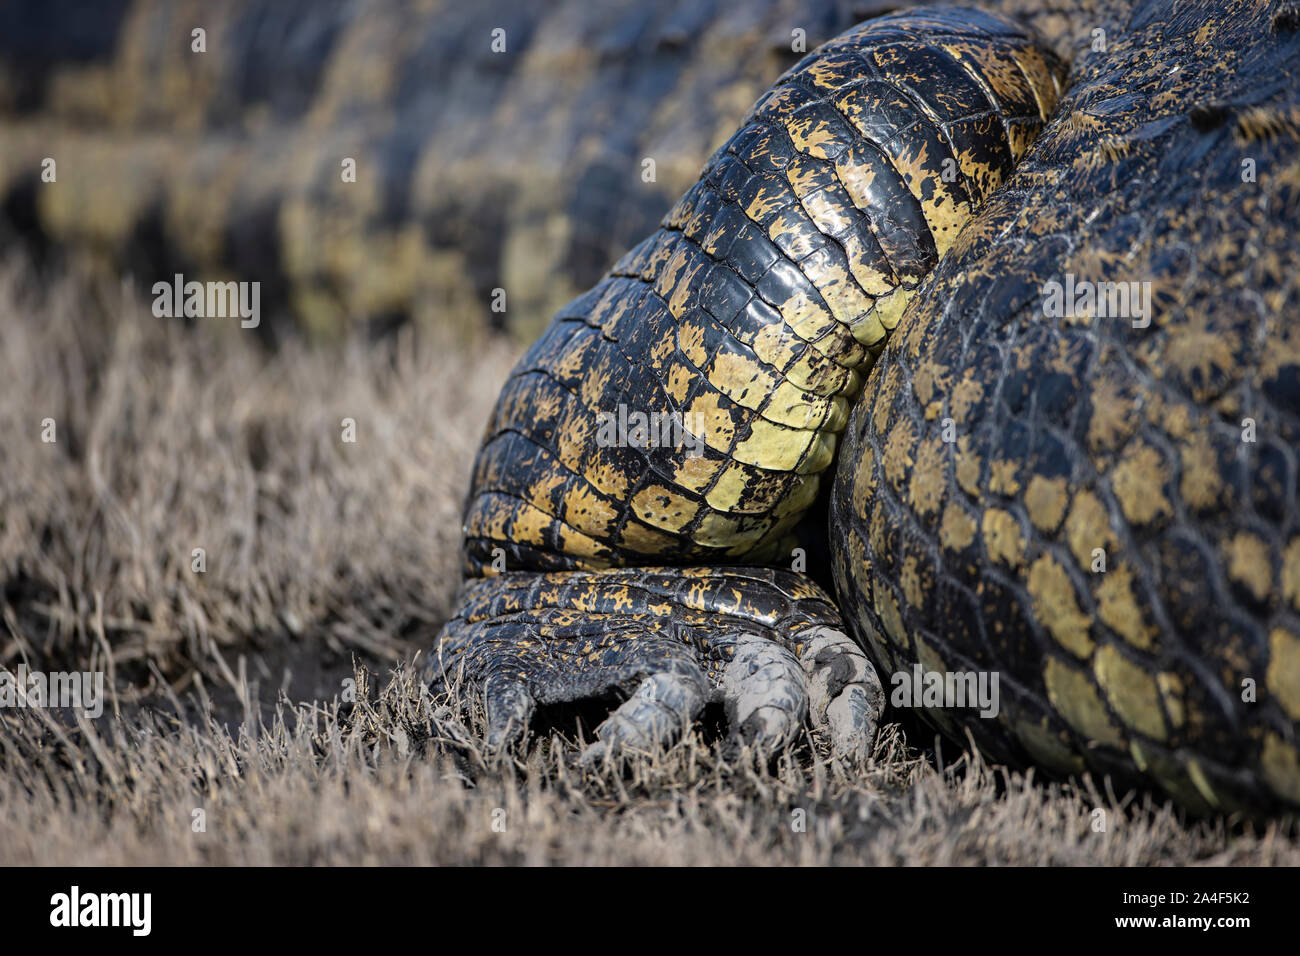 The front foot and claws of a large Nile crocodile Crocodylus niloticus resting on the banks of the Chobe river in Botswana, Africa Stock Photo